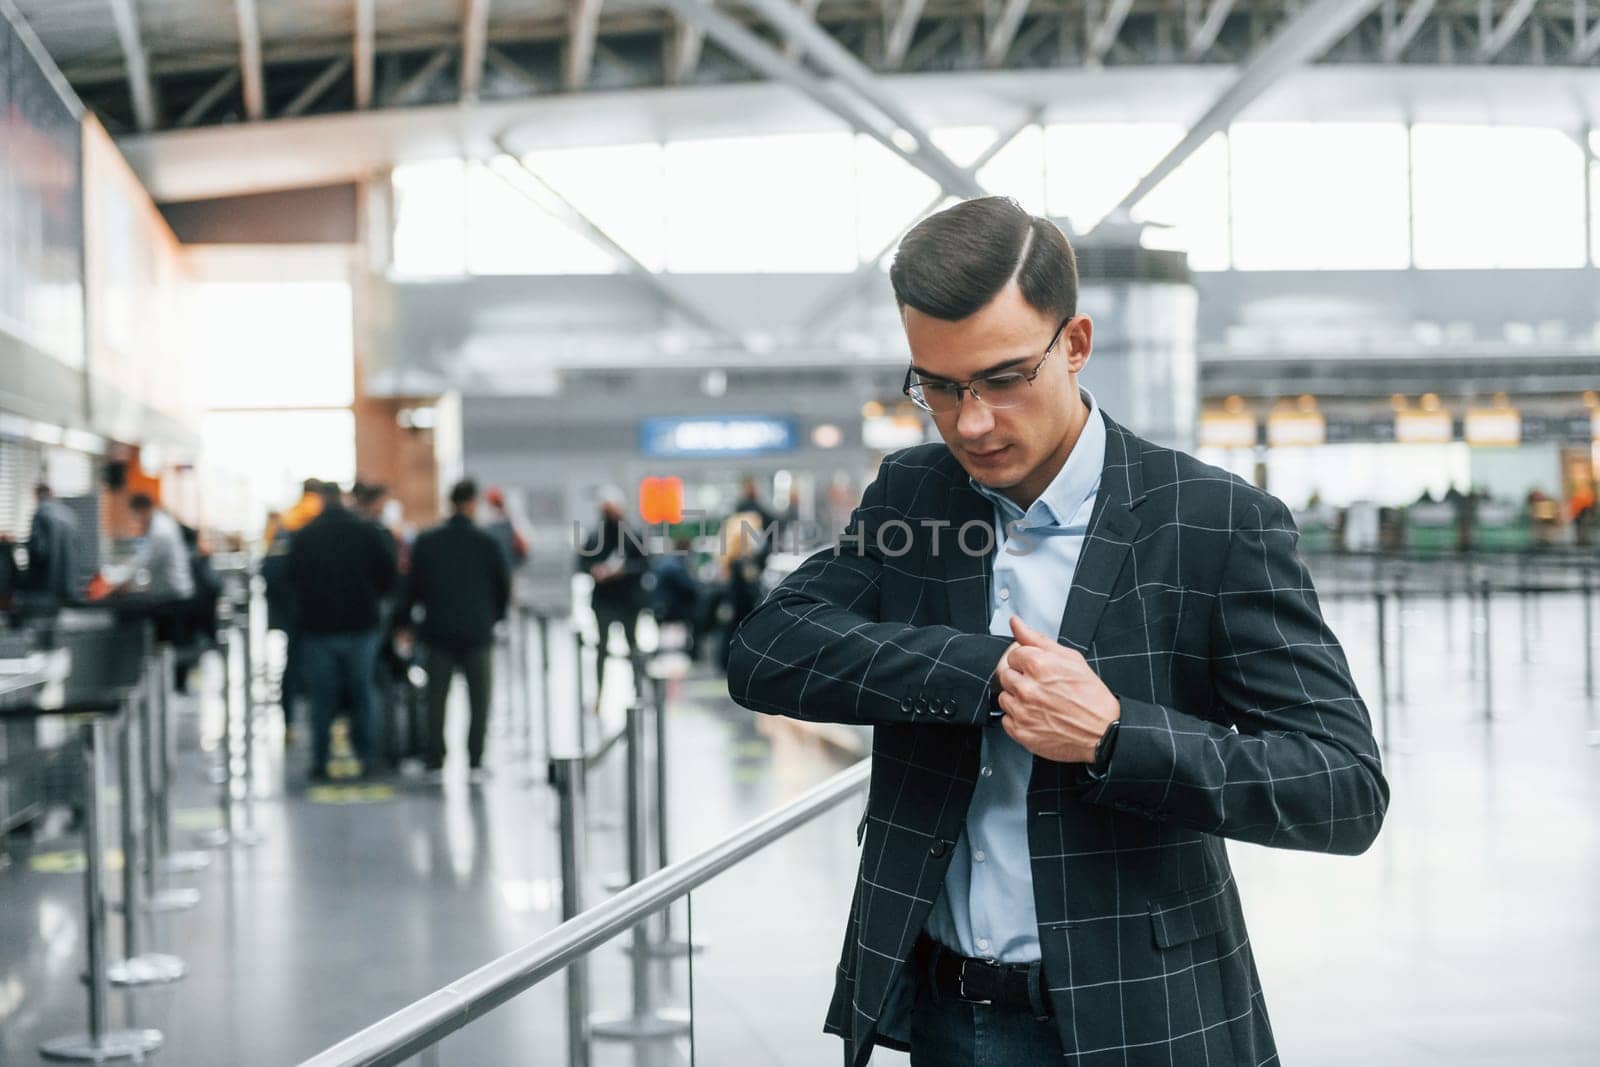 Taking out the documents. Young businessman in formal clothes is in the airport at daytime by Standret